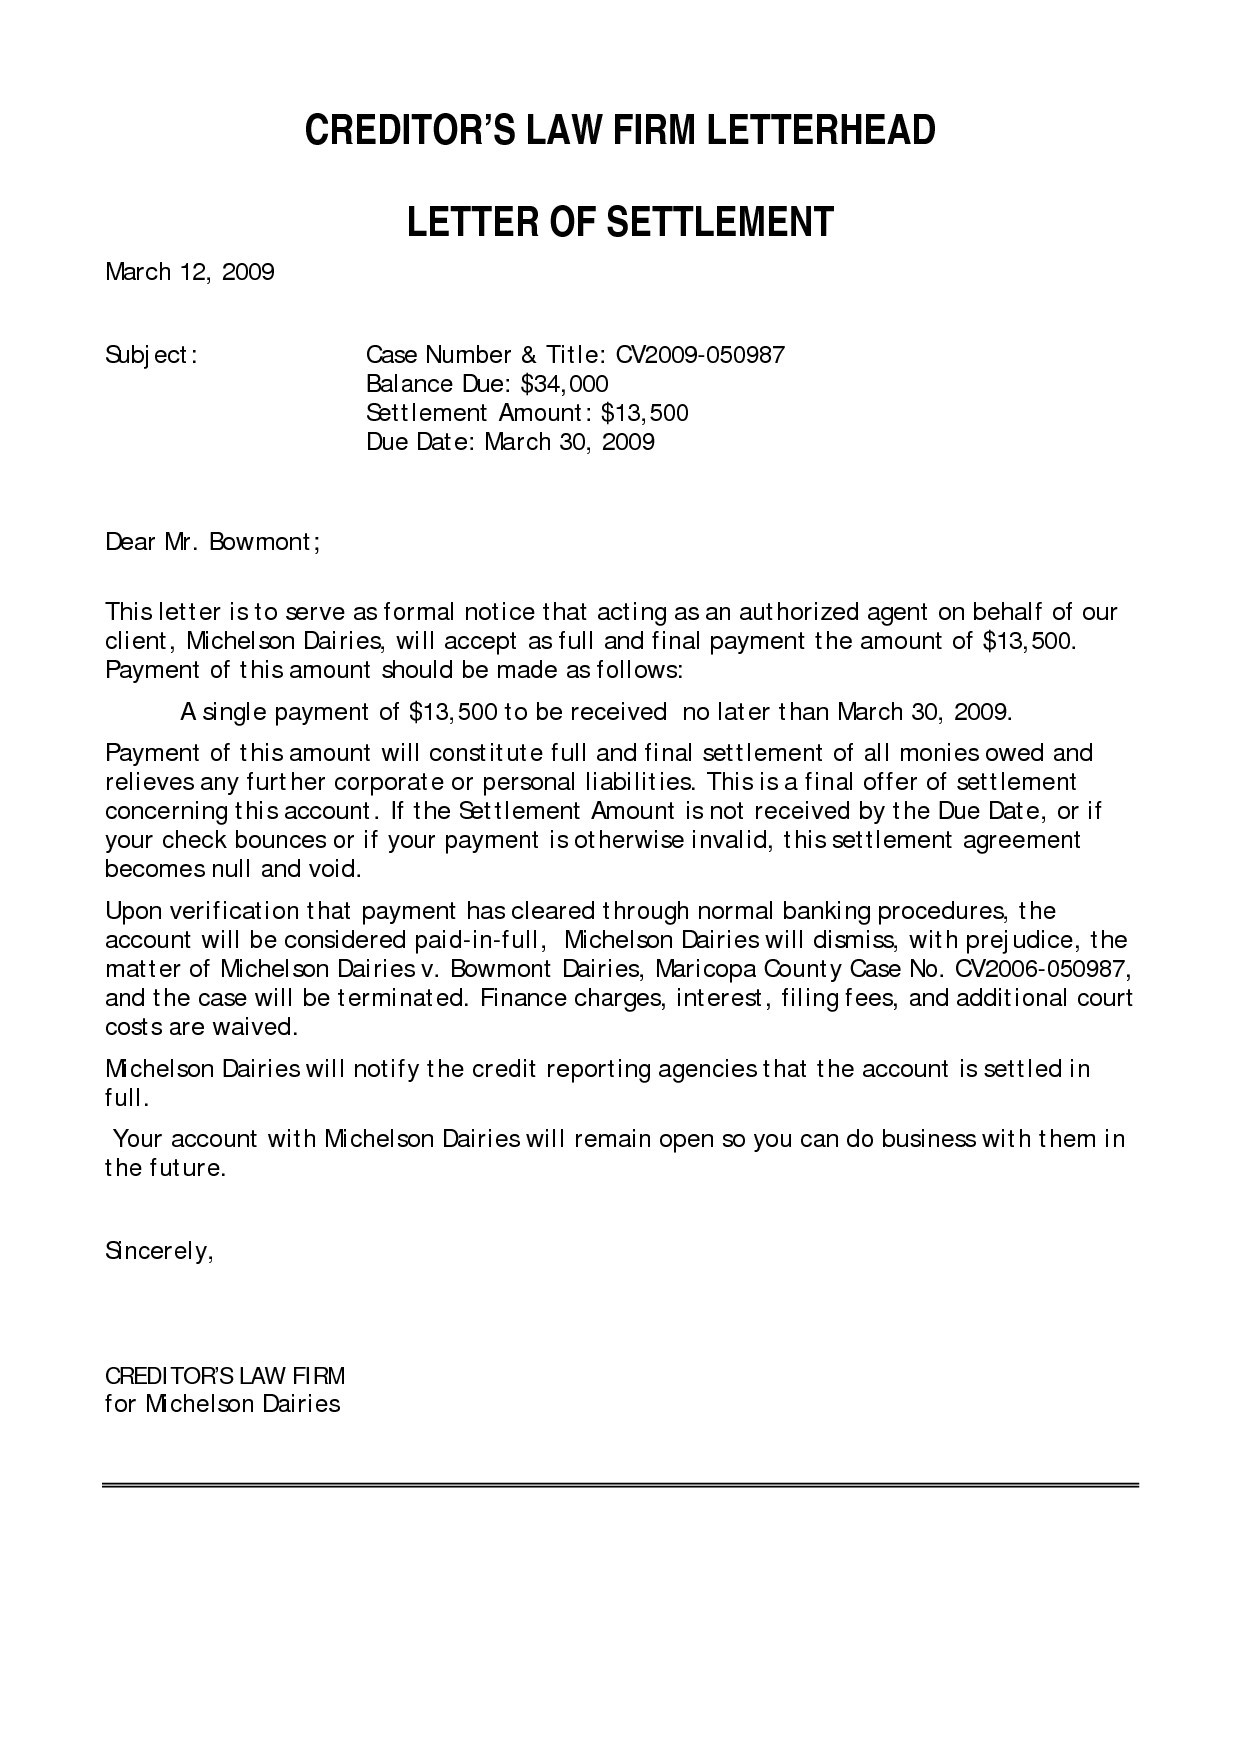 Credit Card Settlement Letter Template - Department Of Education Letter Purging the Record Best Ideas Of